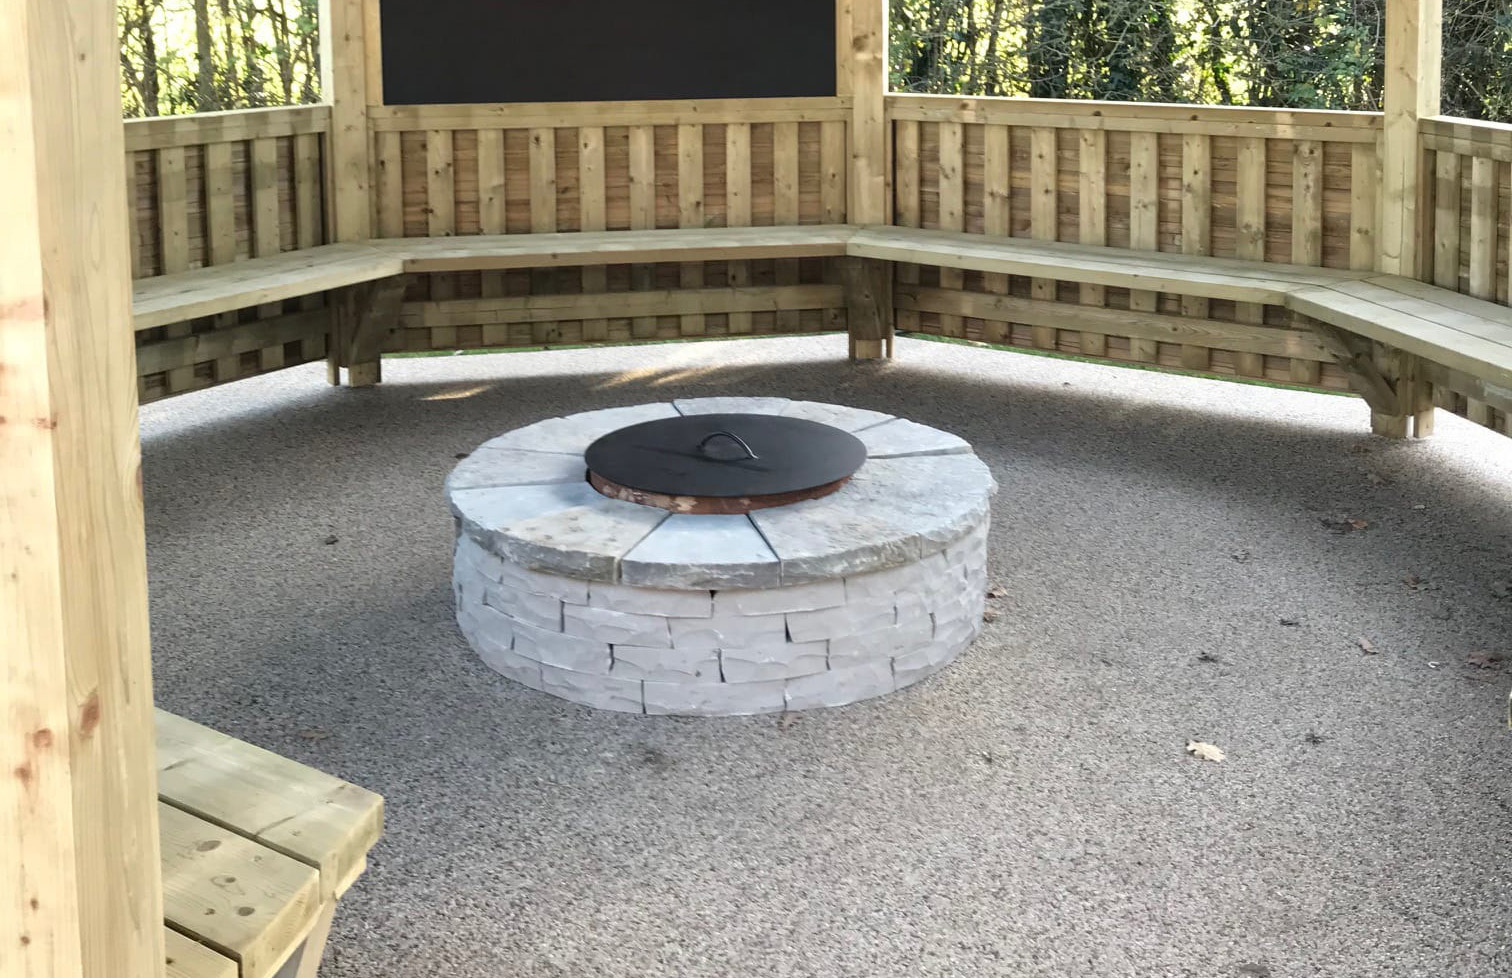 Fire Pits in Shelters